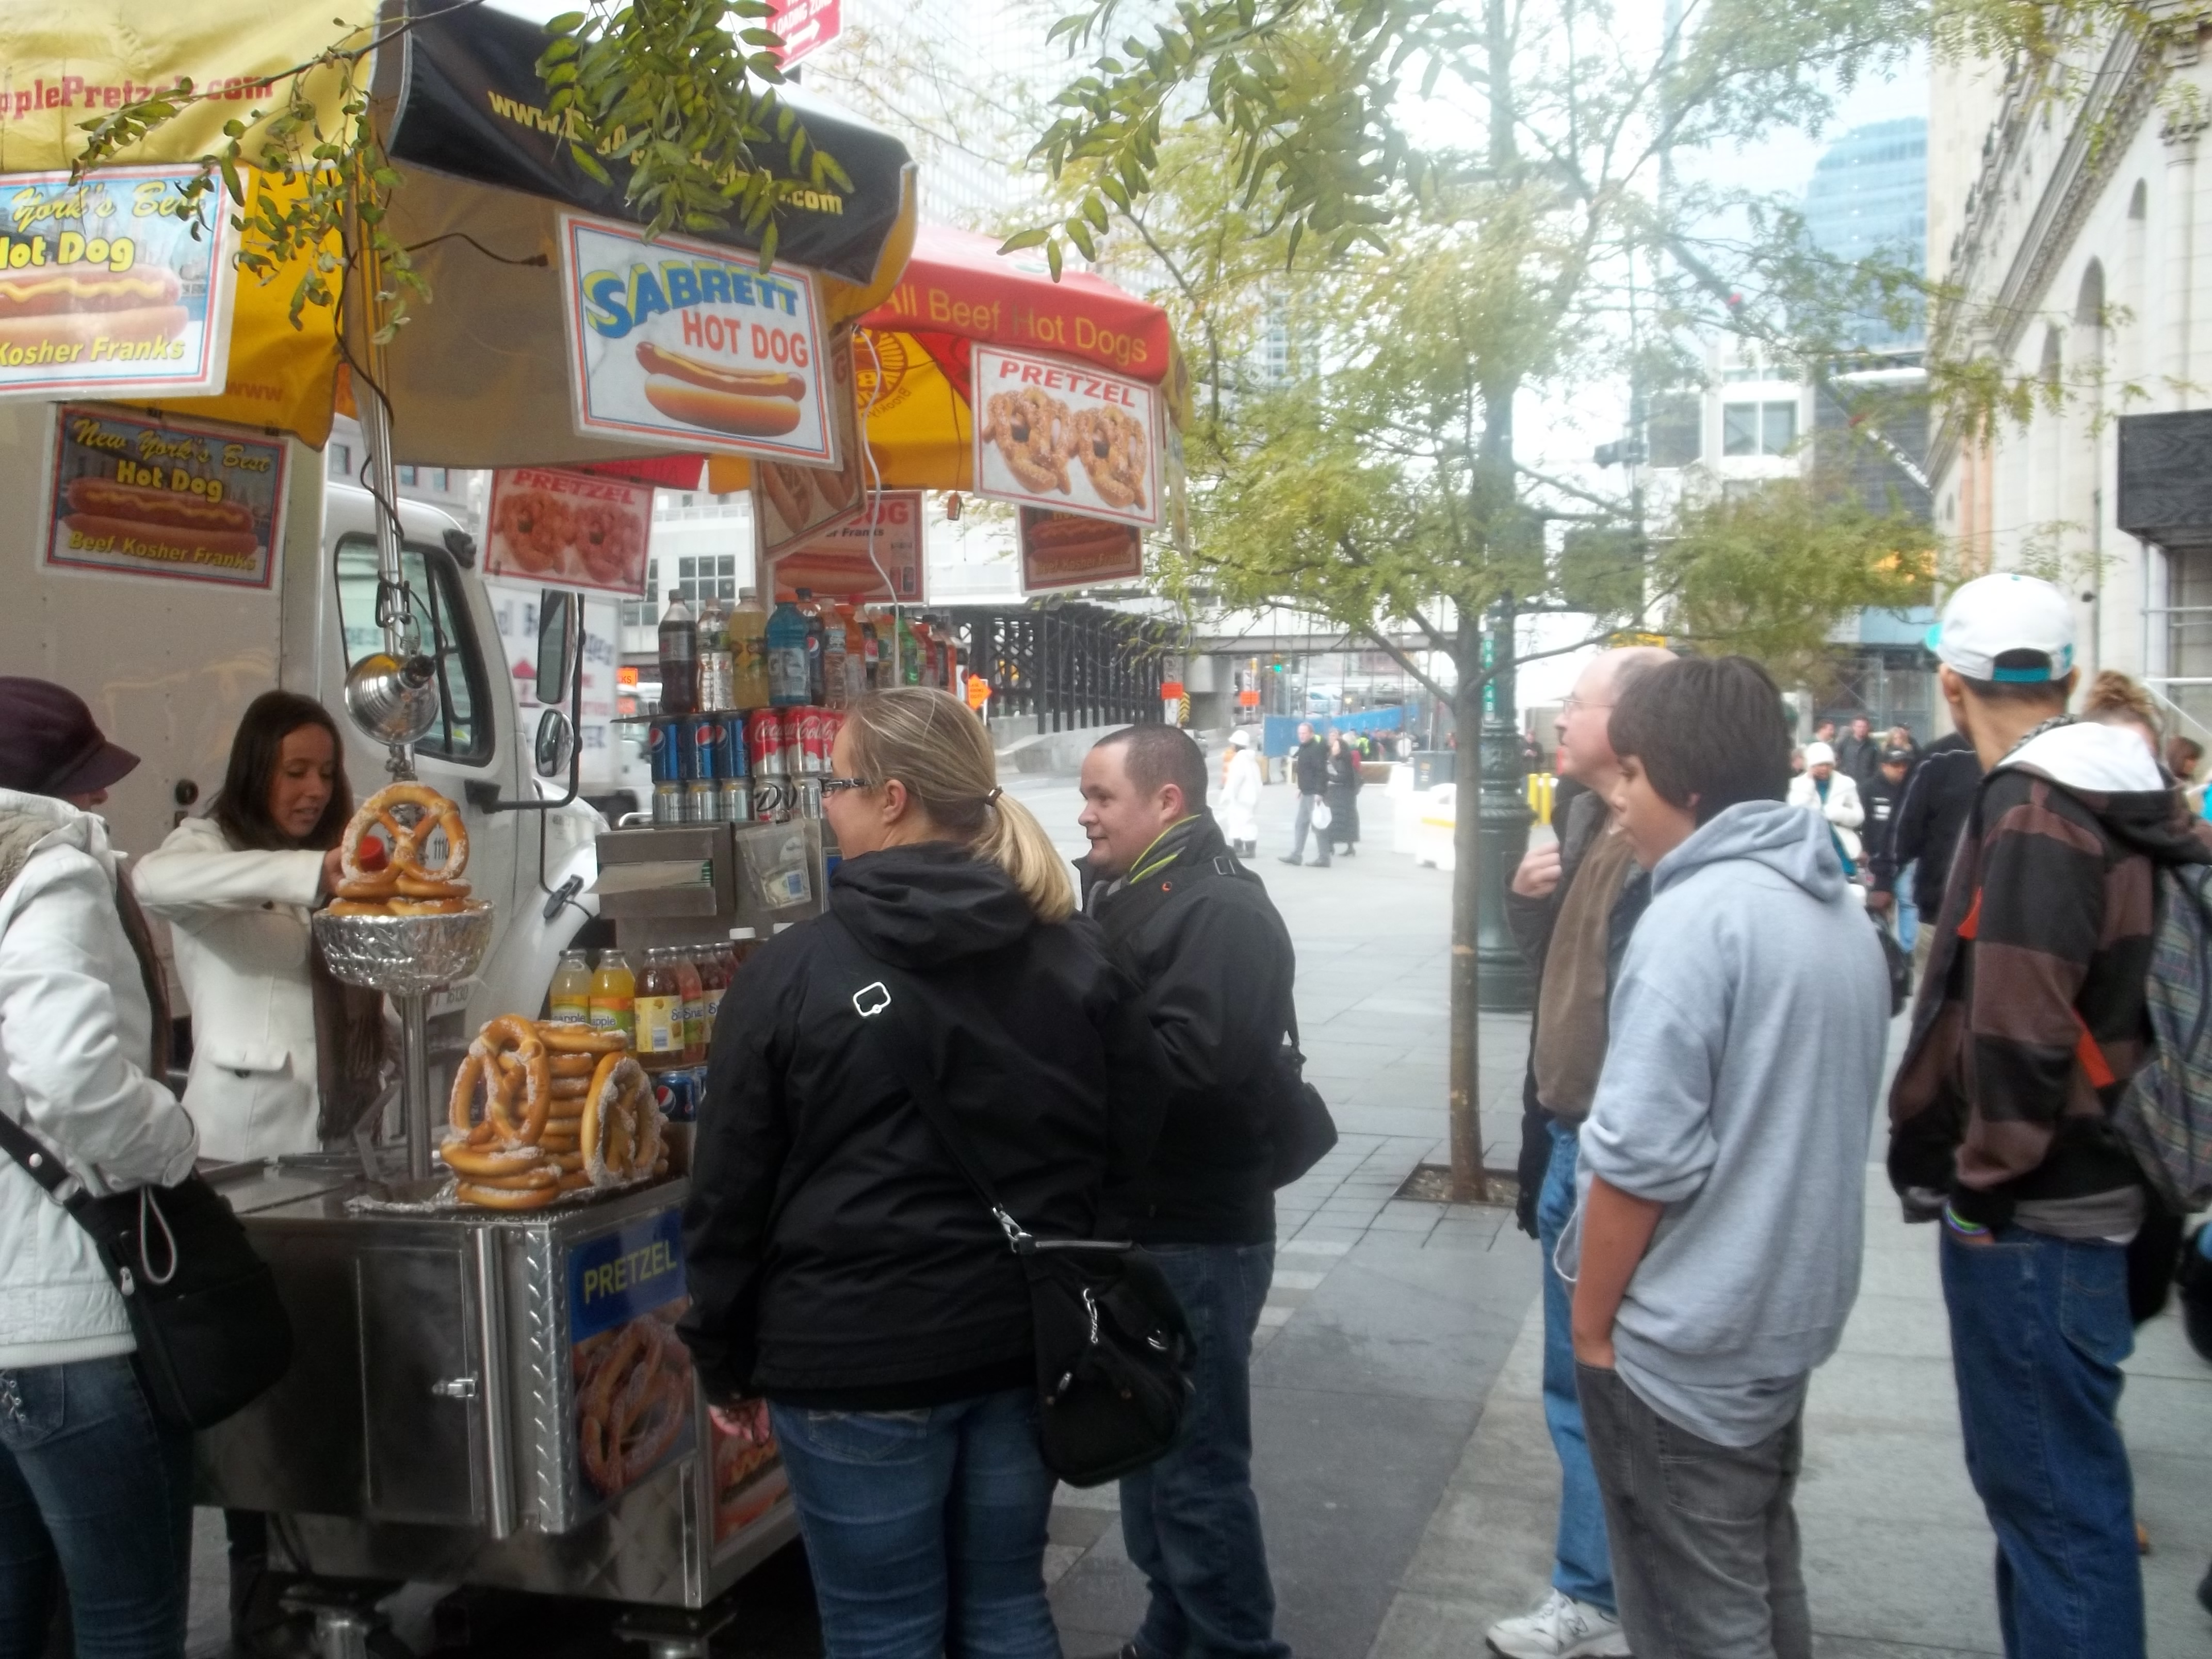 We grabbed a hot dog from a street vendor (another first) outside our hotel!